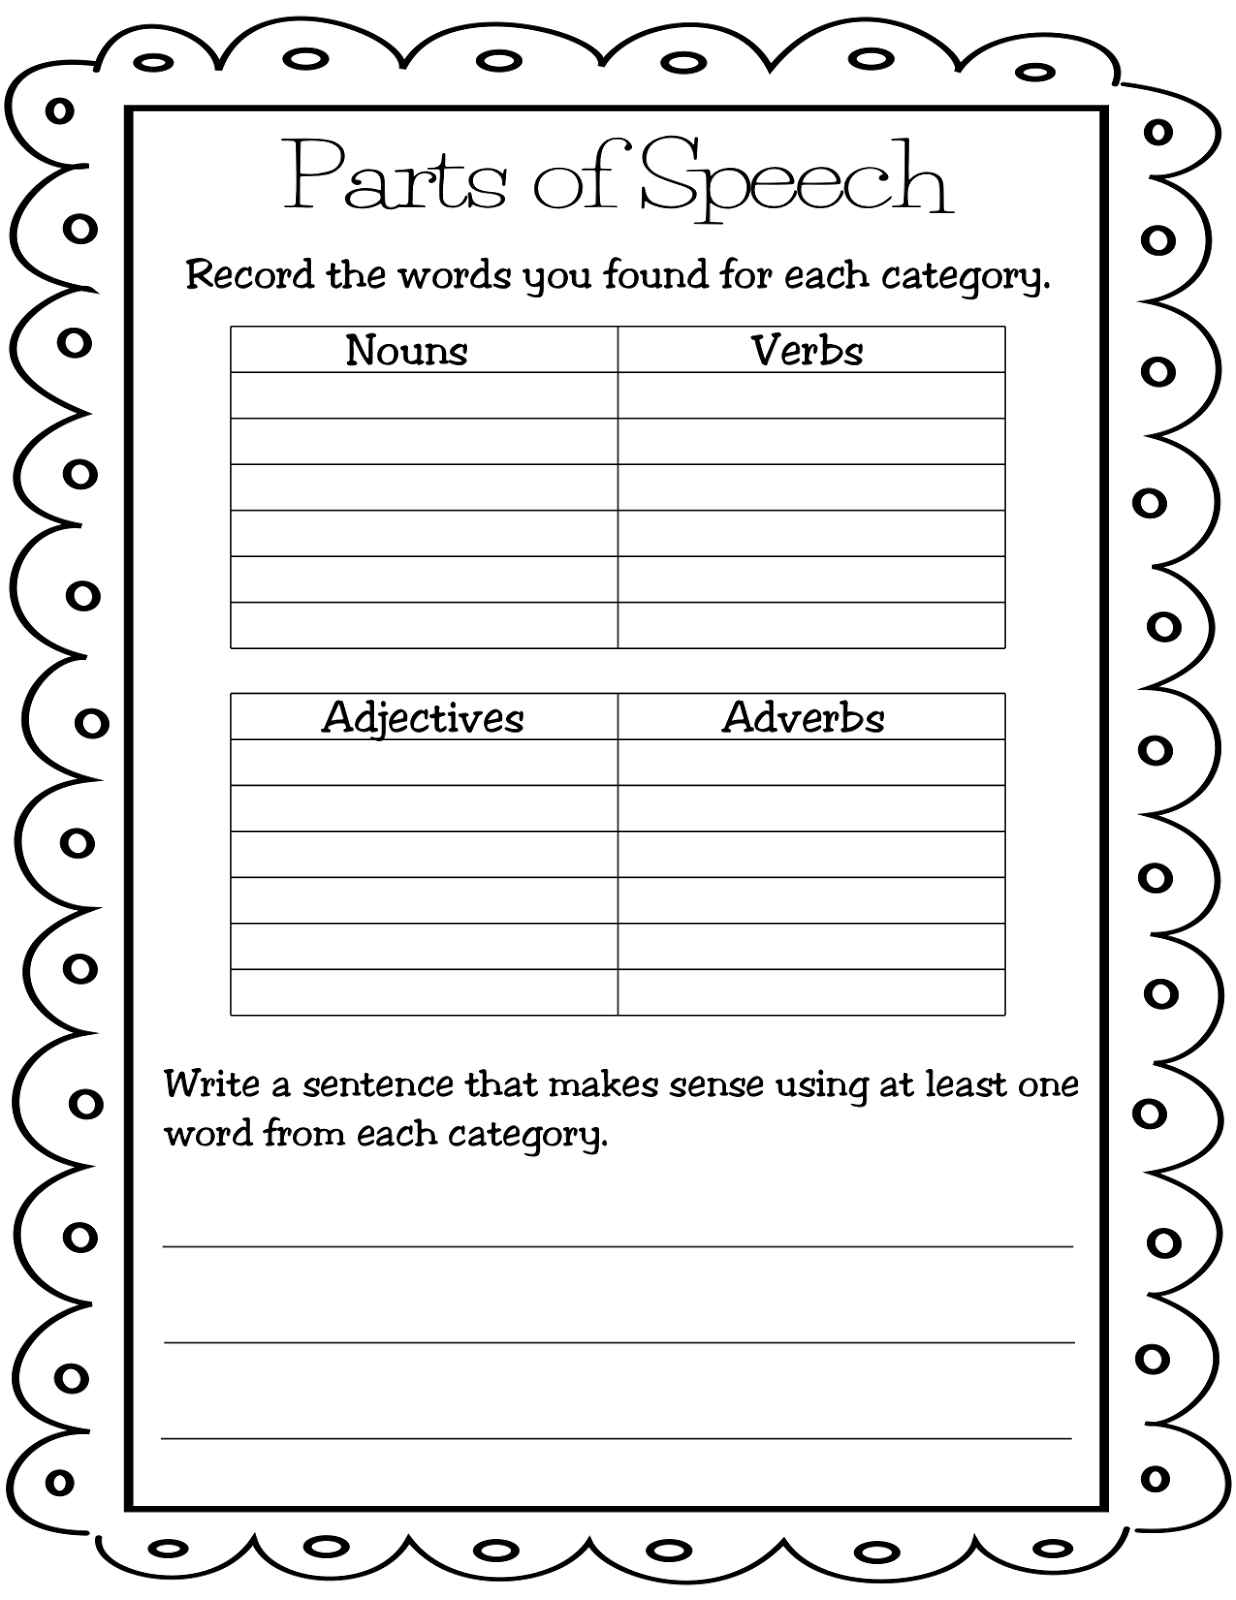 teaching-mrs-t-parts-of-speech-lessons